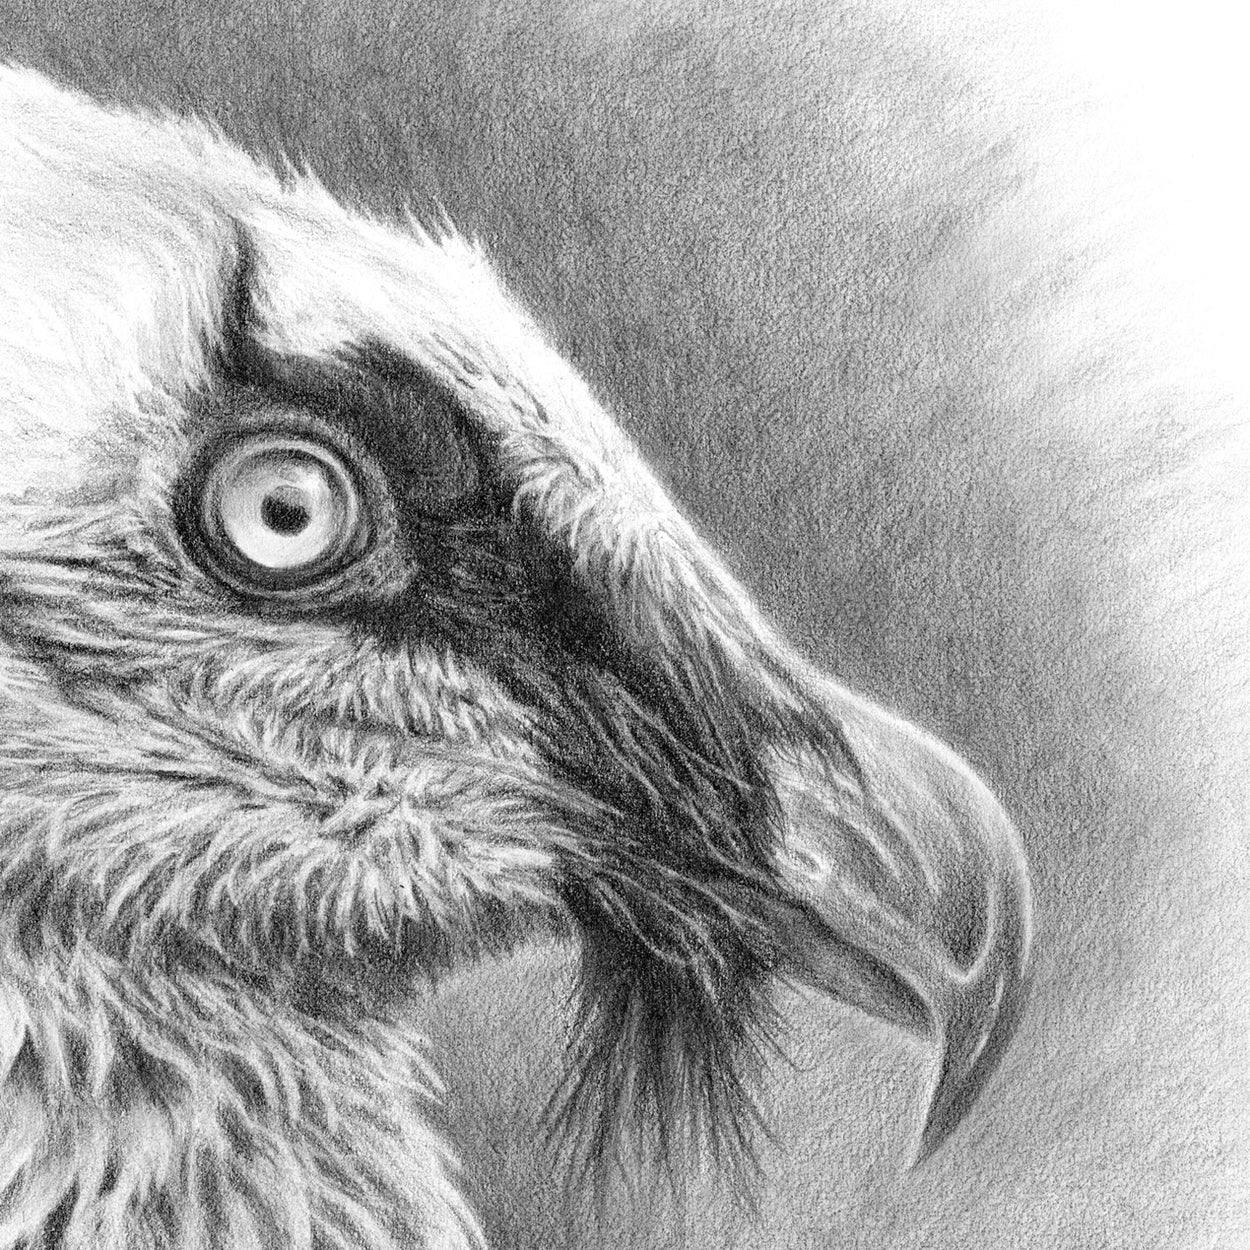 Bearded Vulture Drawing Close-up 1 - The Thriving Wild - Jill Dimond